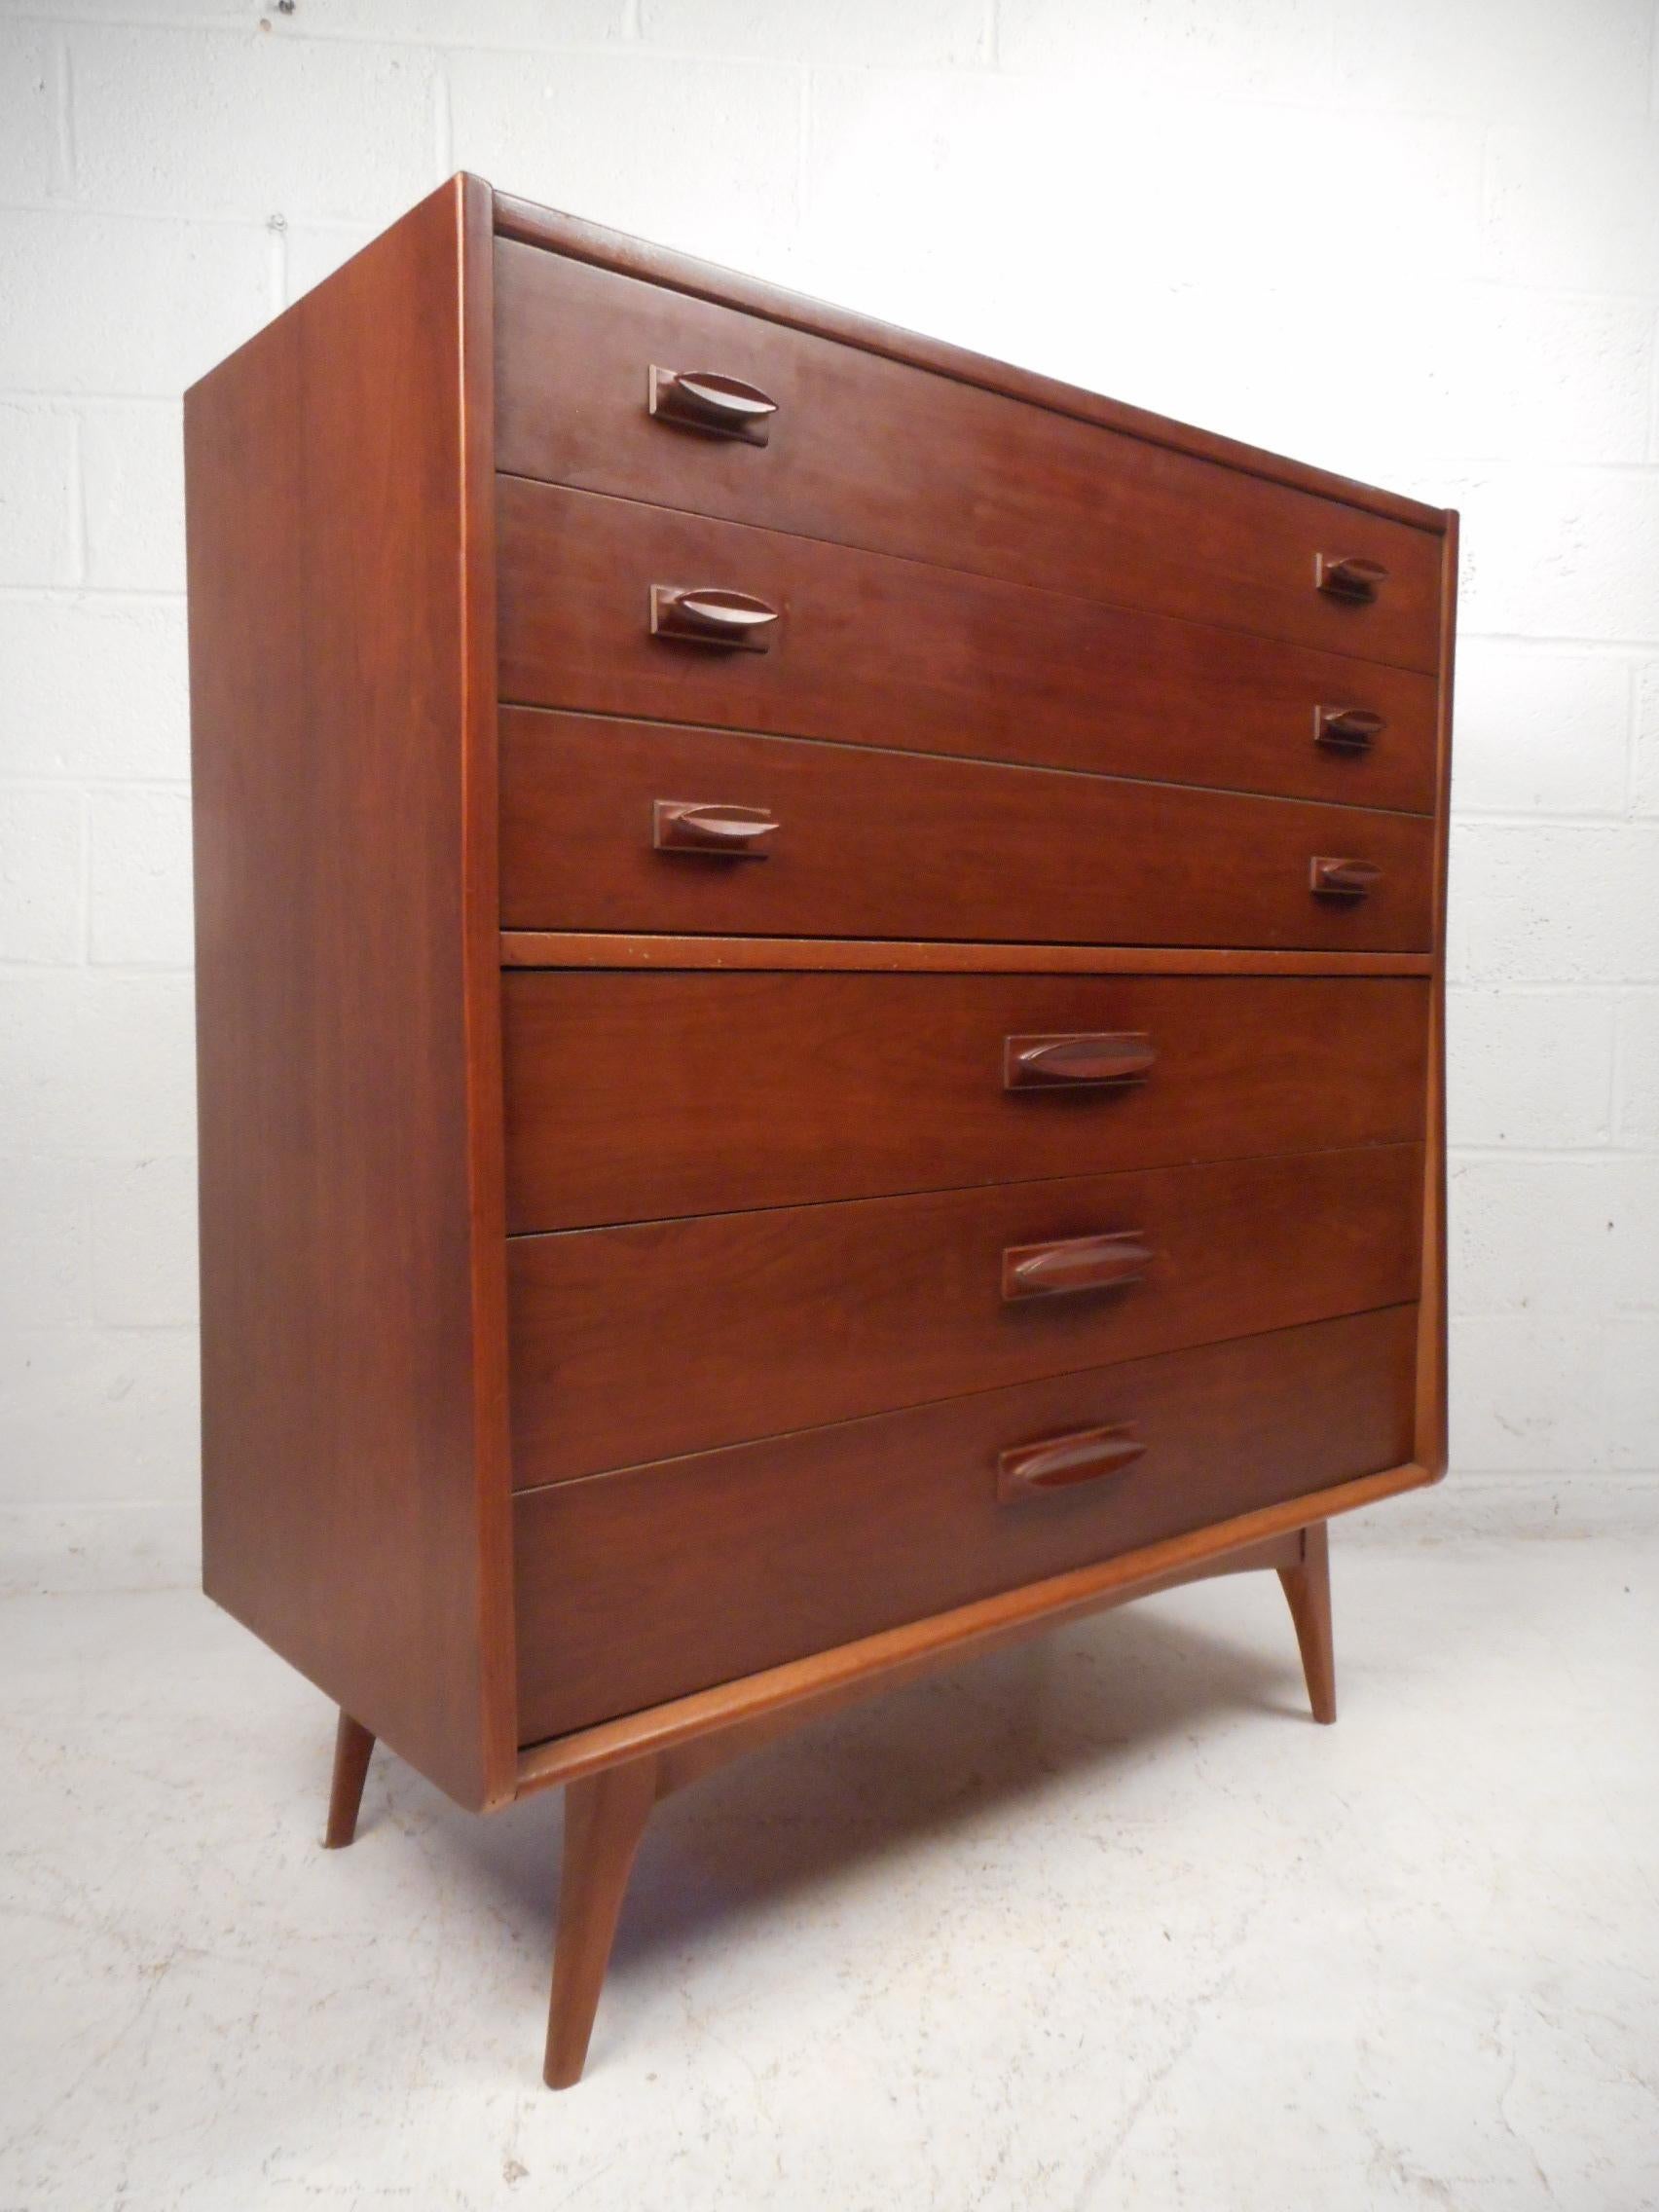 Beautiful midcentury highboy dresser made by United Furniture Corporation. Five dovetail joined drawers with one oversized partitioned drawer provide ample room for storage. Sculpted drawer pulls and understatedly stylish splayed legs give this case